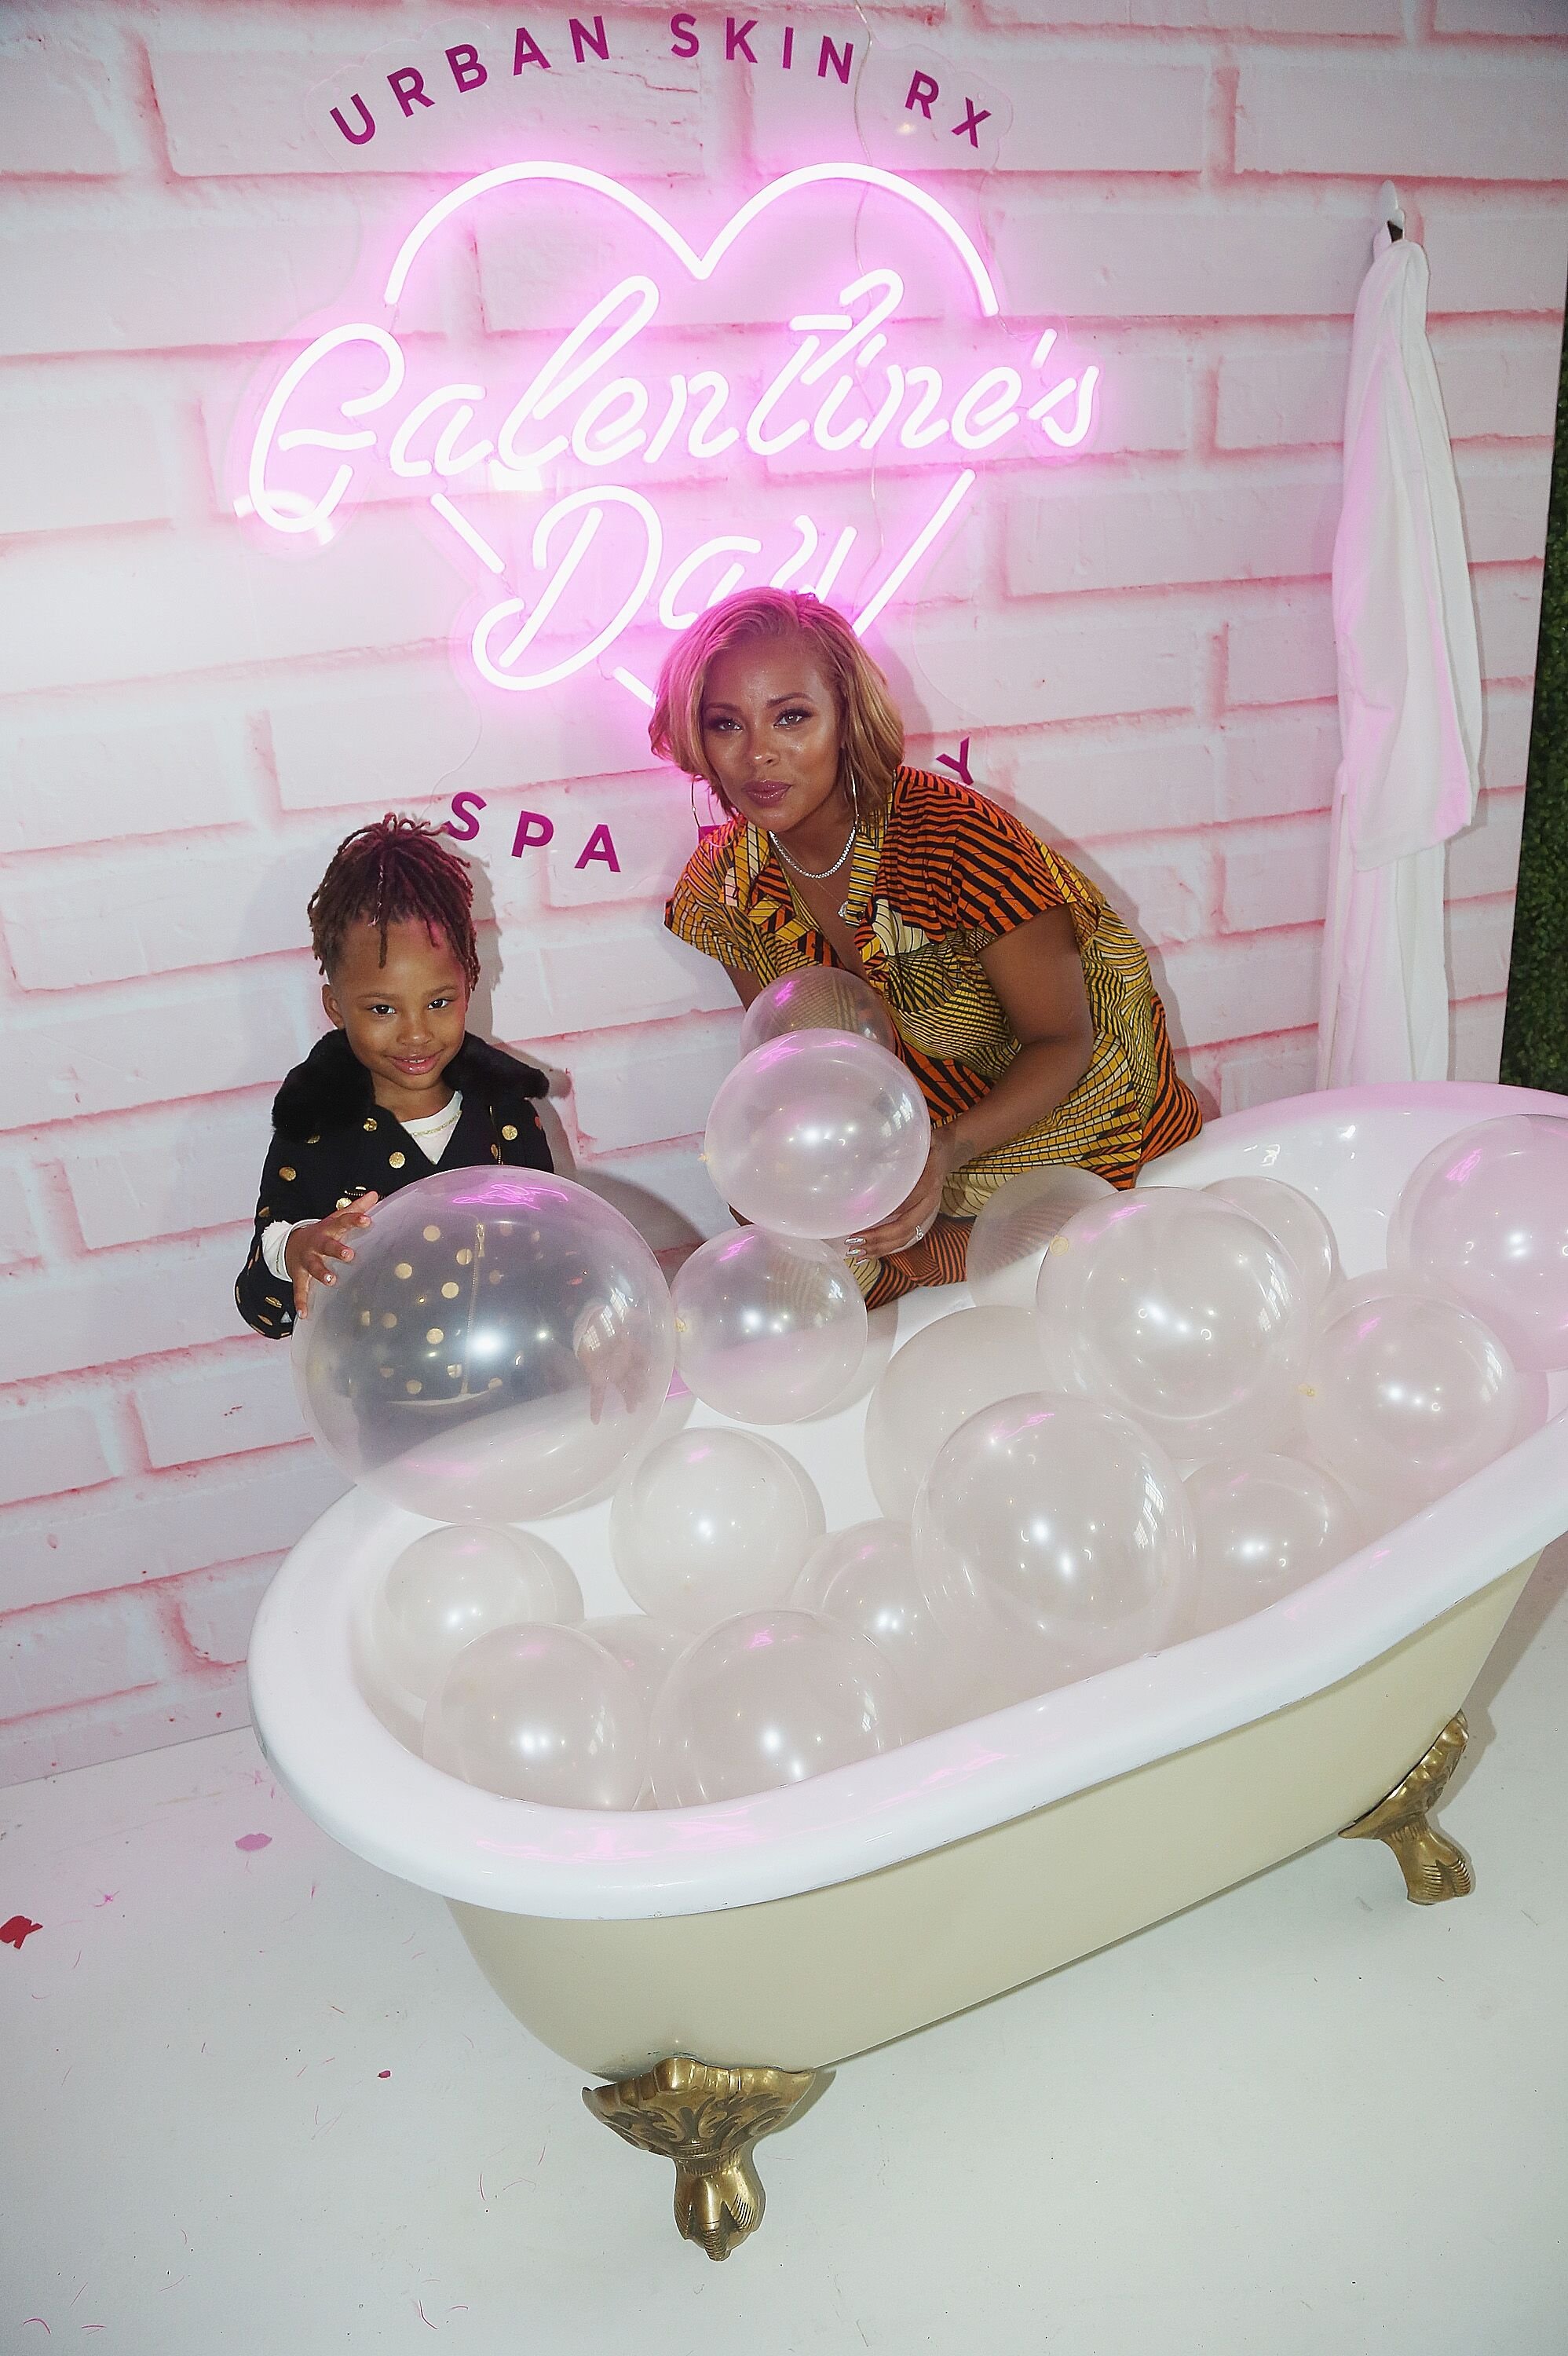  Marley Rae McCall and mother Eva Marcille pose at The Urban Skin Galentine's Day Event  in New York in 2019 | Source: Getty Images